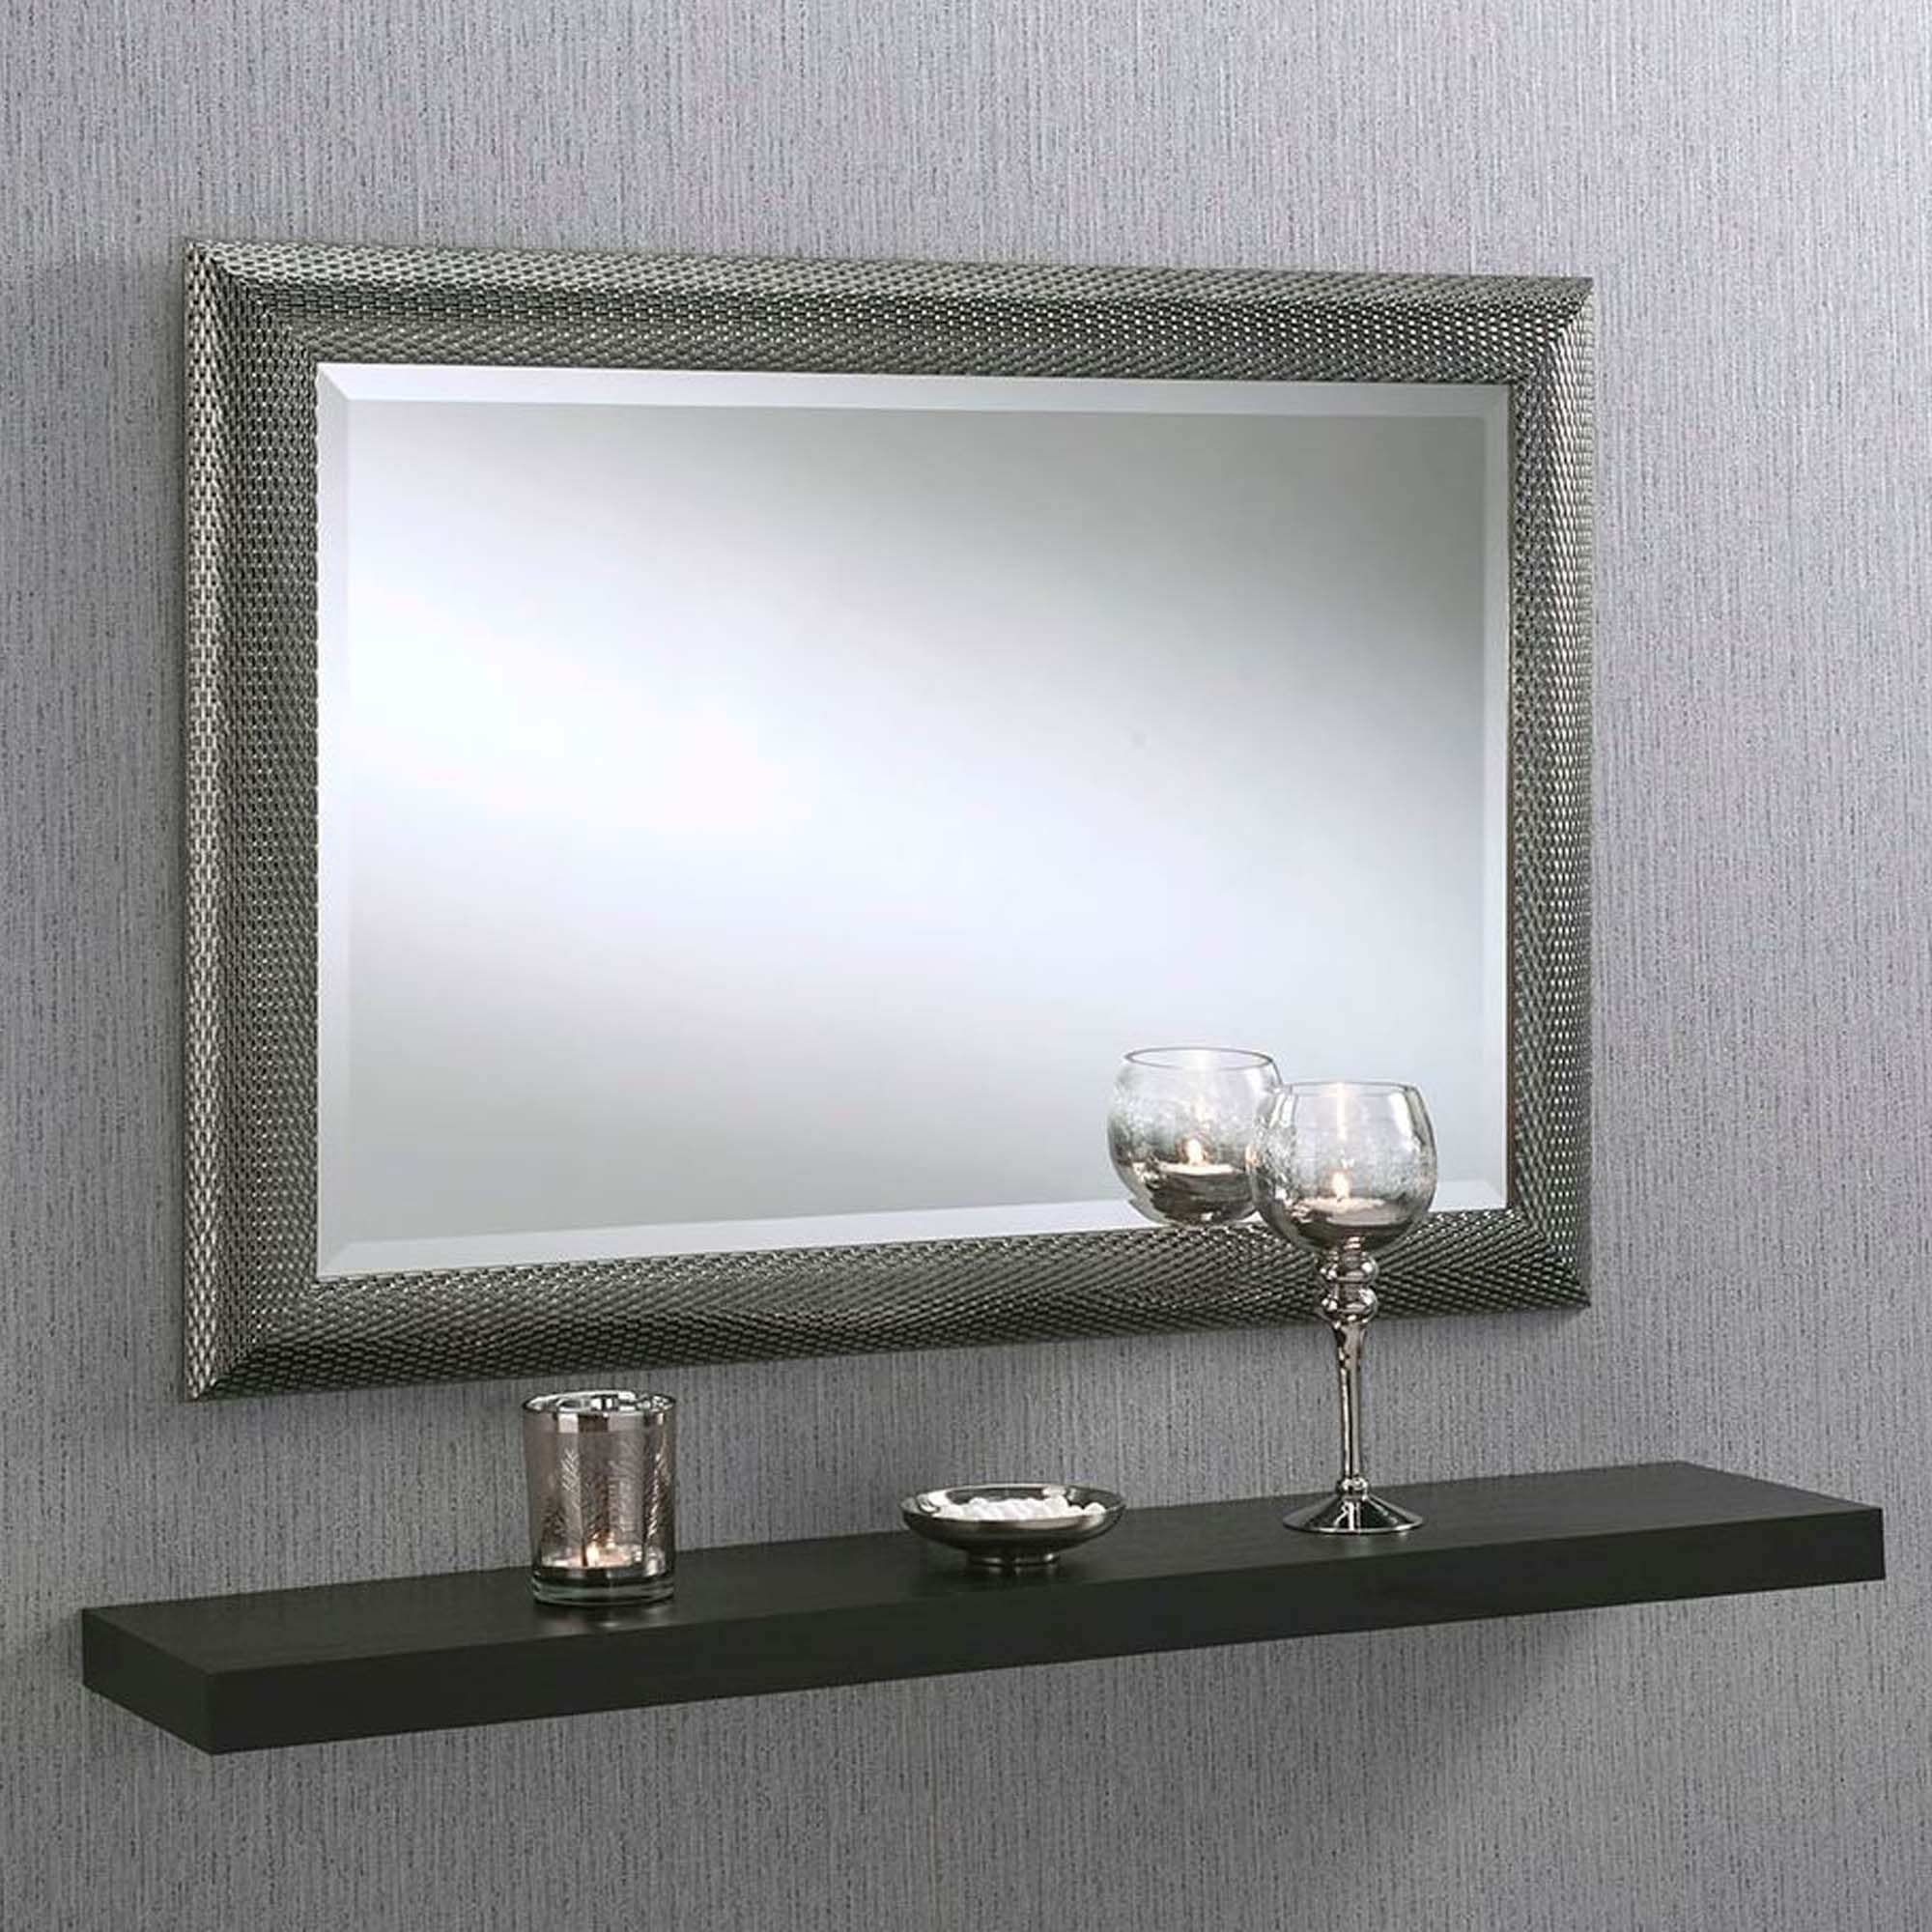 Dimple Effect Grey Rectangular Wall Mirror | Homesdirect365 With Wall Mirrors (View 7 of 15)